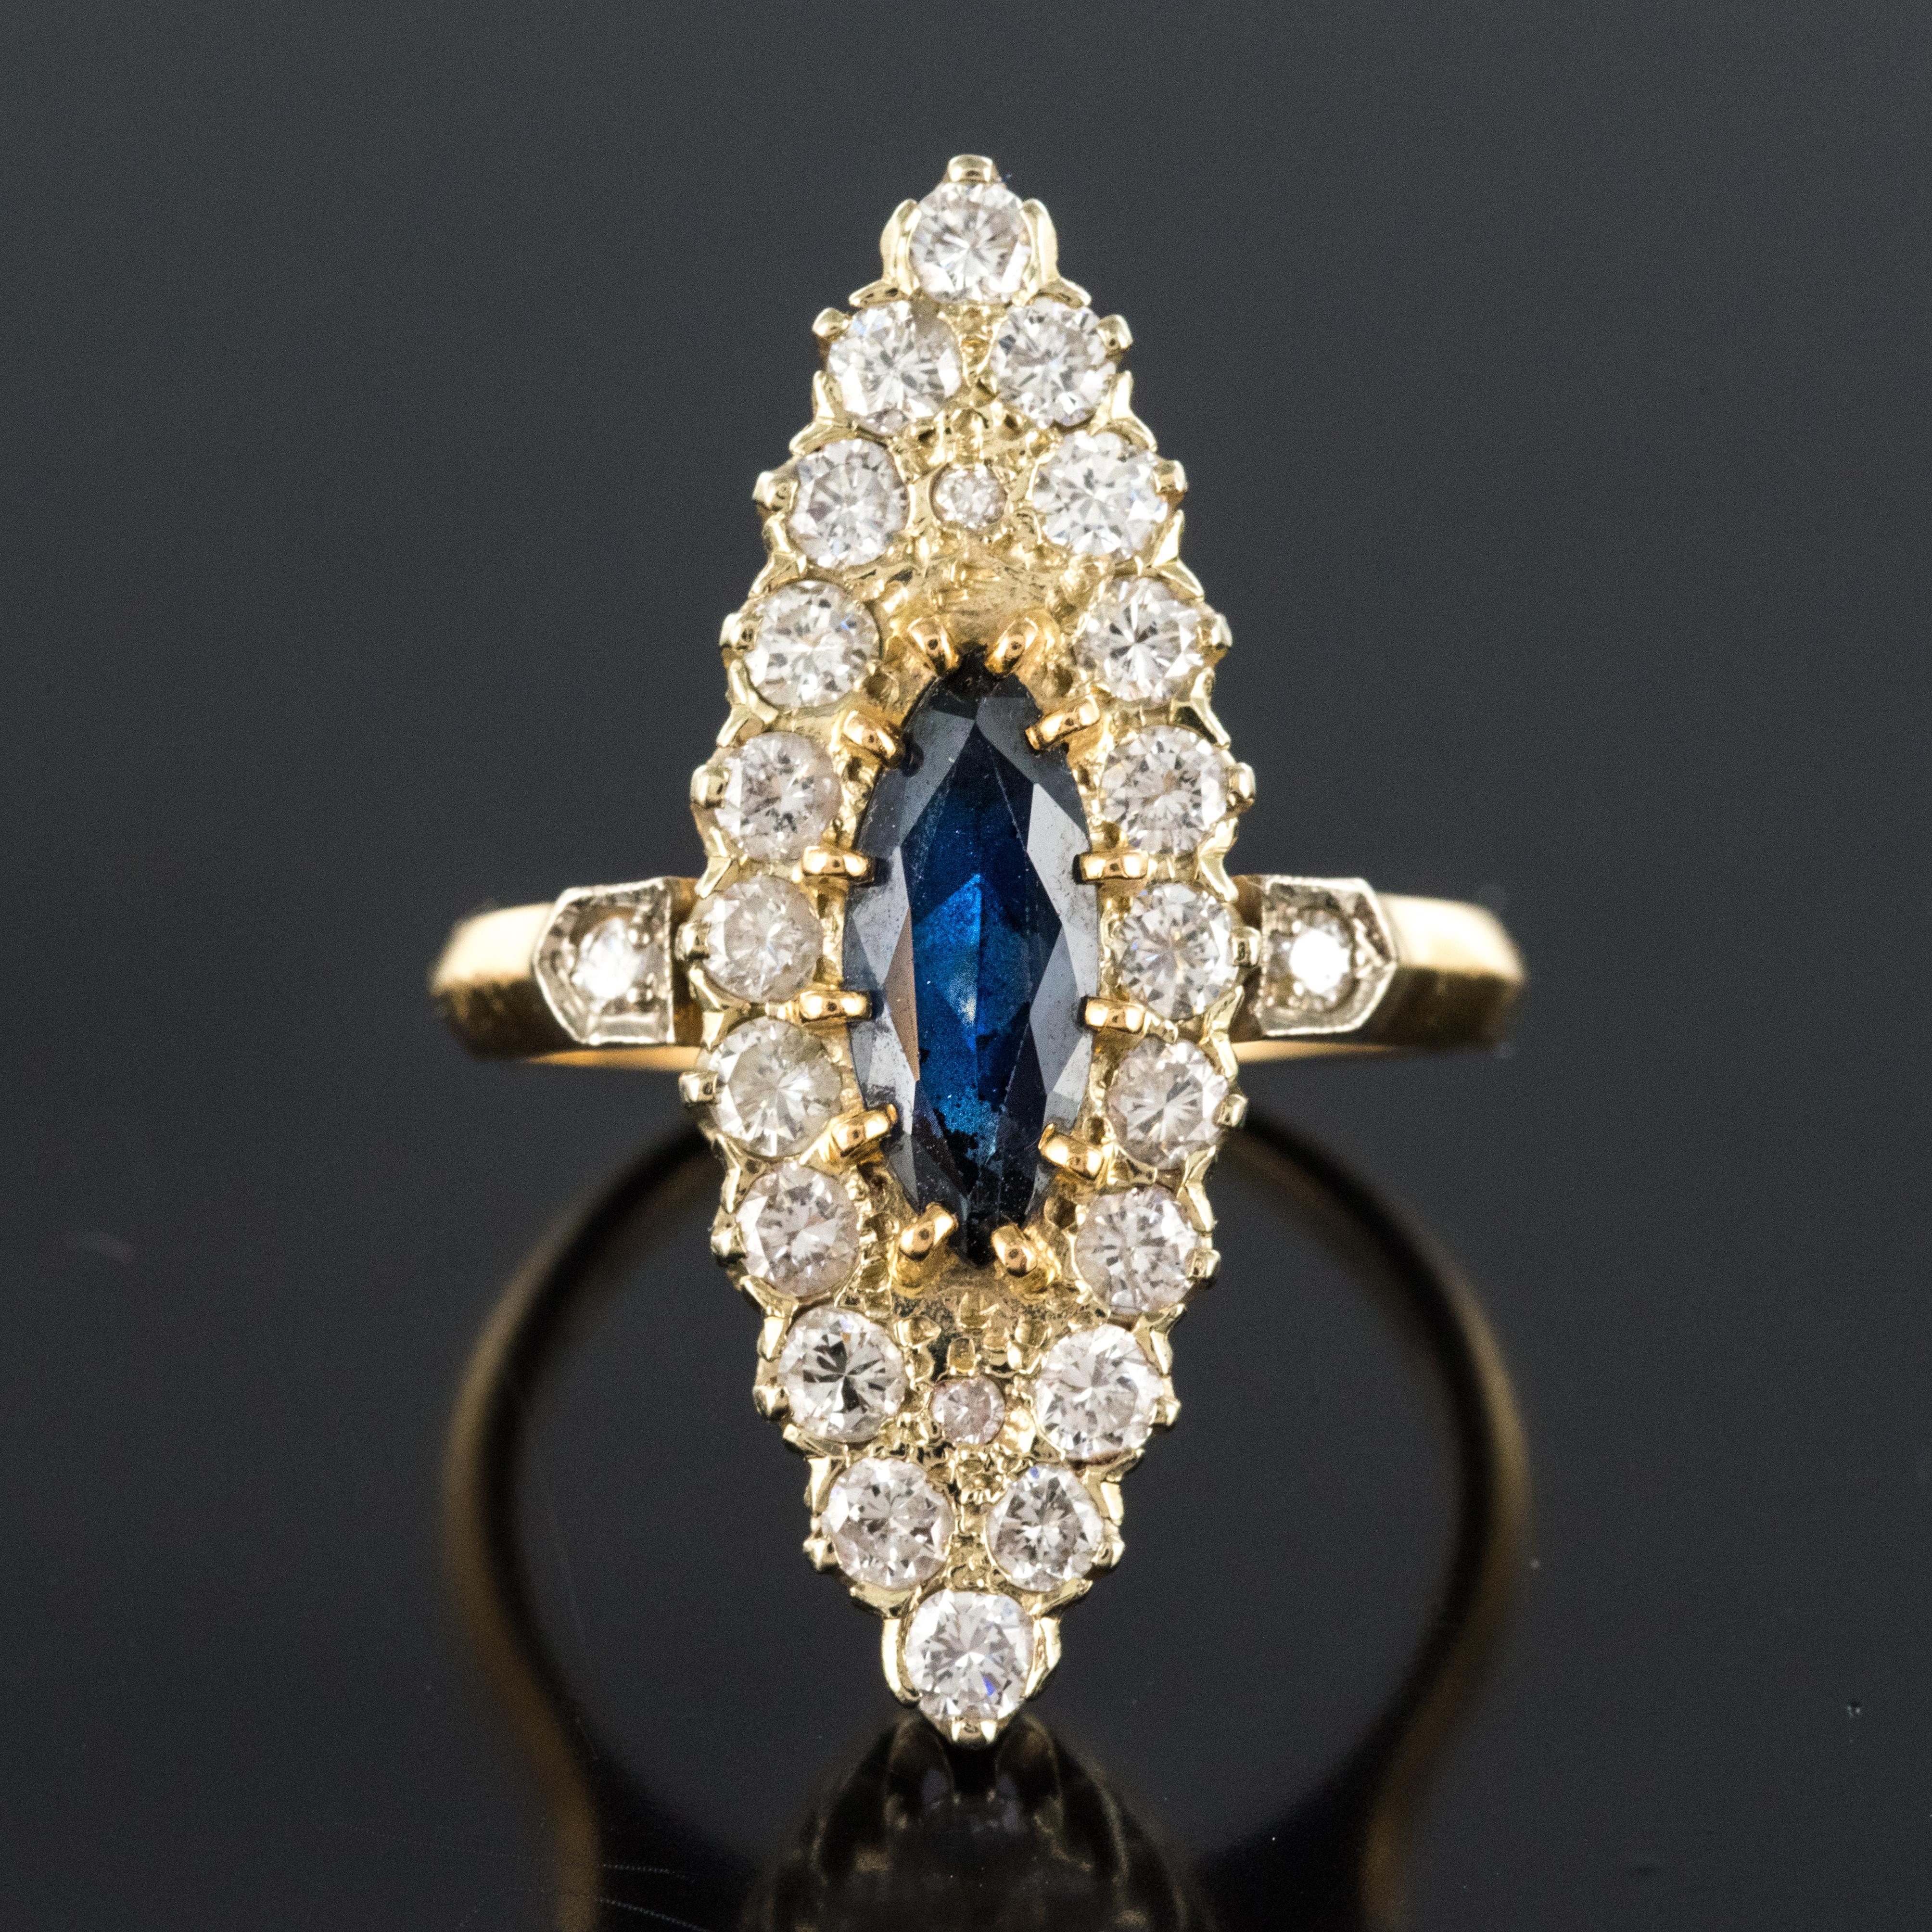 Ring in 18 karats yellow and white gold, eagle's head hallmark.
Marquise shape, this retro ring is adorned on its top with an intense blue sapphire, shuttle size. It is surrounded by brilliant- cut diamonds. On both sides, the start of the ring is